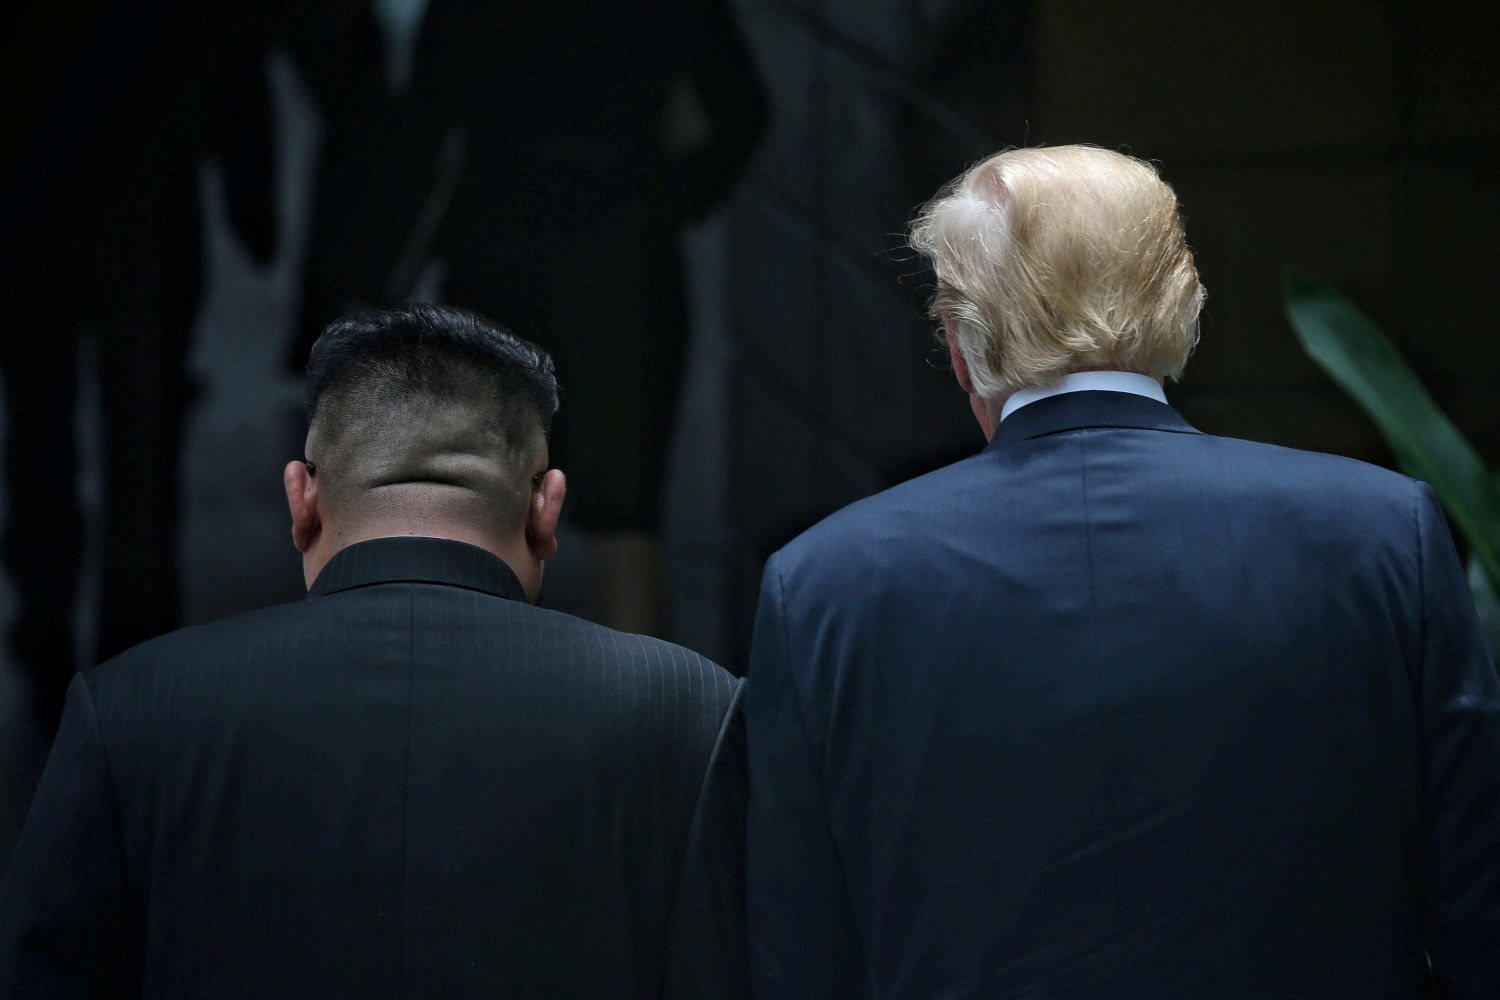 U.S. President Donald Trump walks with North Korean leader Kim Jong Un at the Capella Hotel on Sentosa island in Singapore June 12, 2018. Kevin Lim/The Straits Times via REUTERS ATTENTION EDITORS - THIS PICTURE WAS PROVIDED BY A THIRD PARTY     TPX IMAGES OF THE DAY - RC1464F28D00